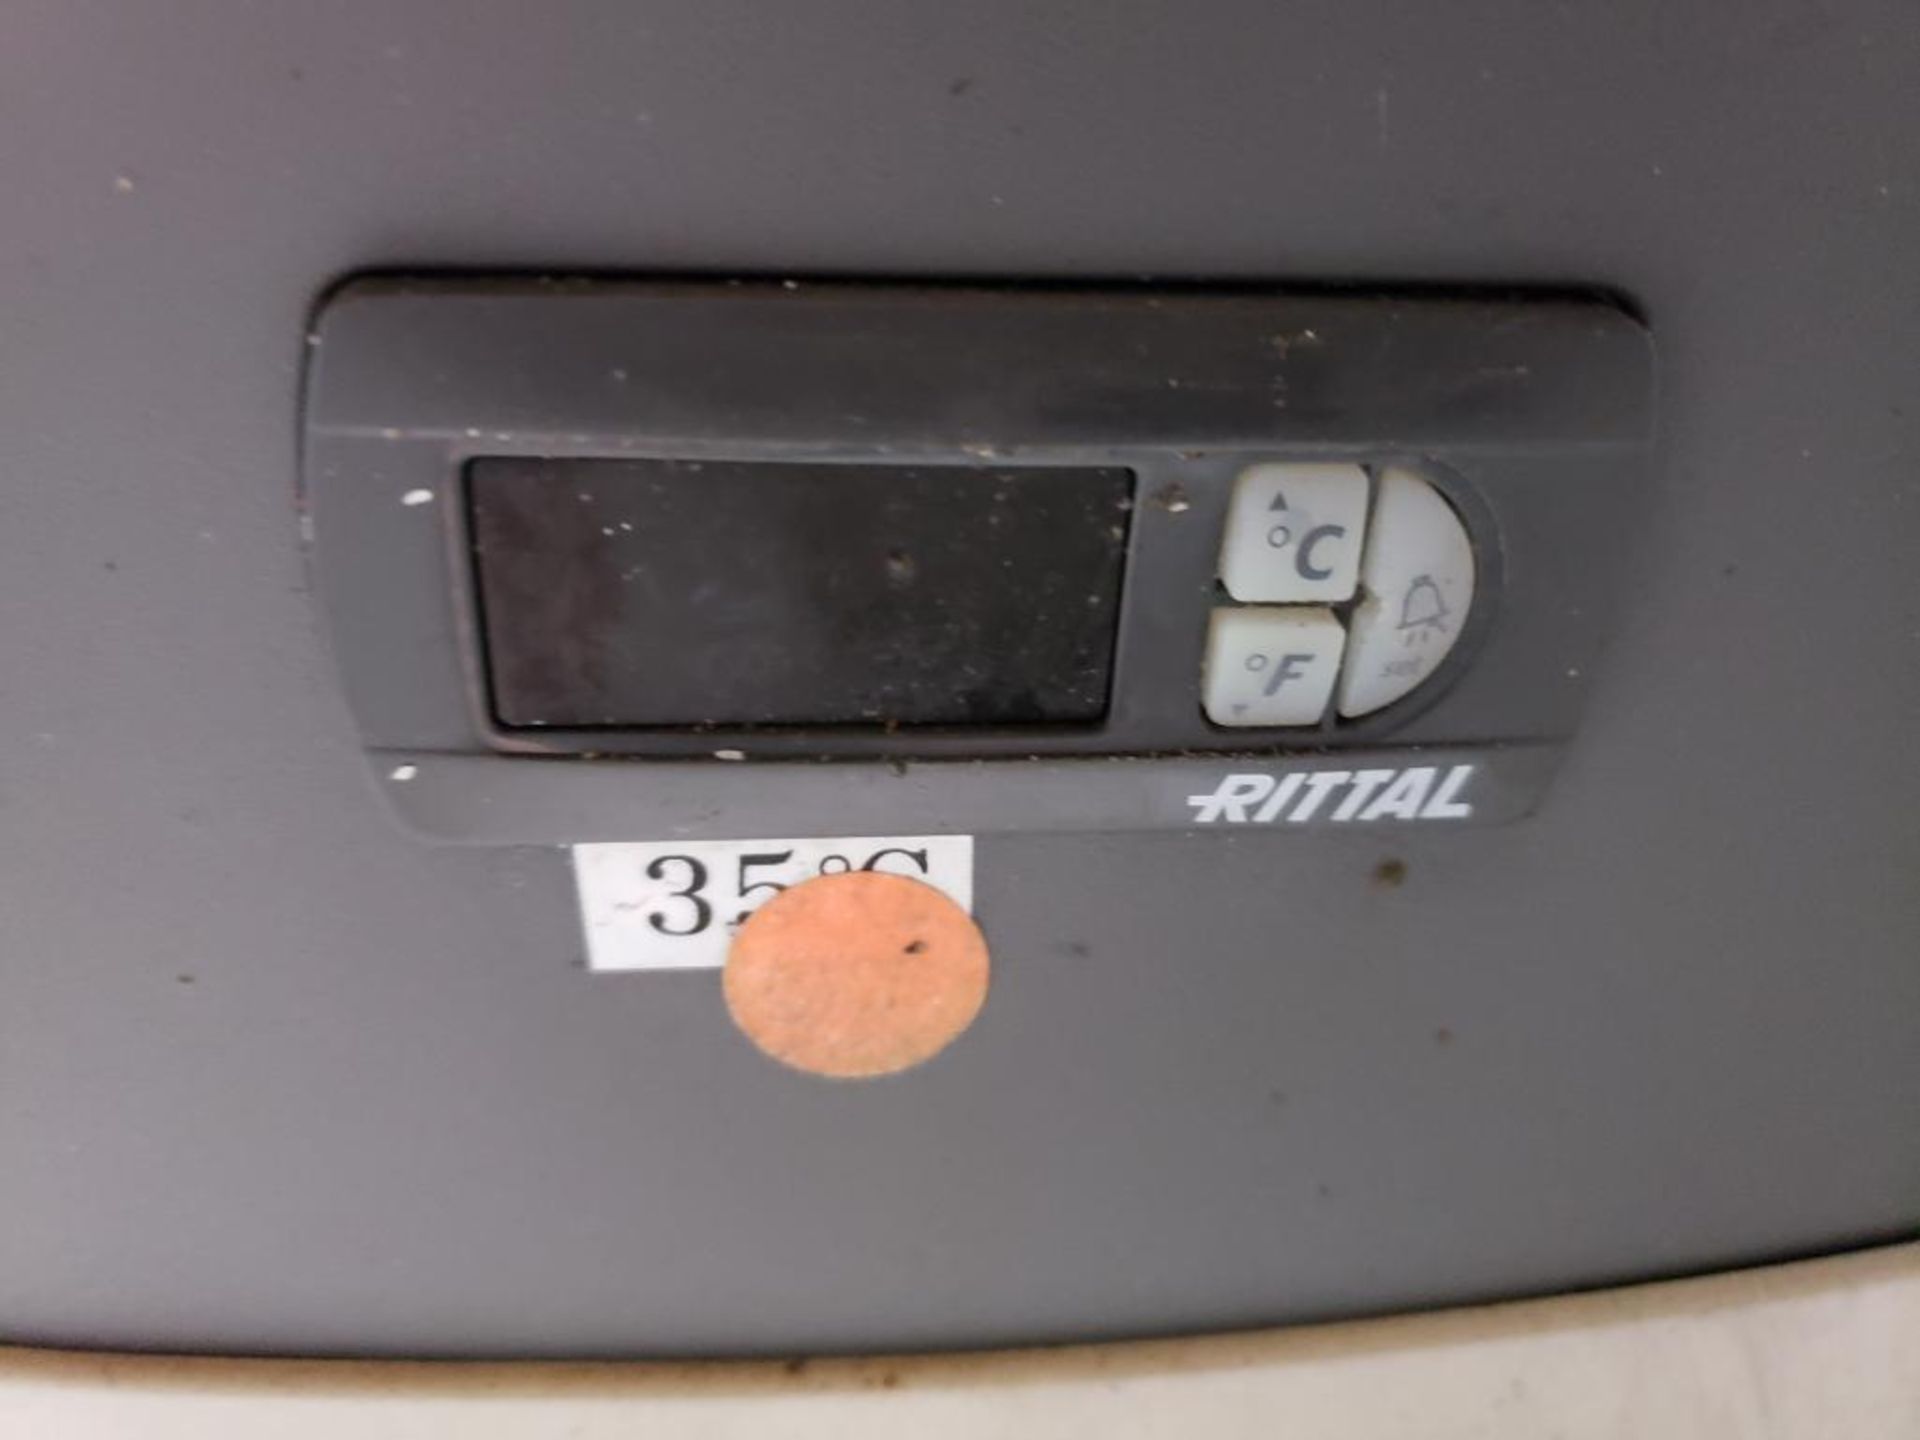 Rittal electronic enclosure air conditioner. Model number SK-3305.500. - Image 2 of 4